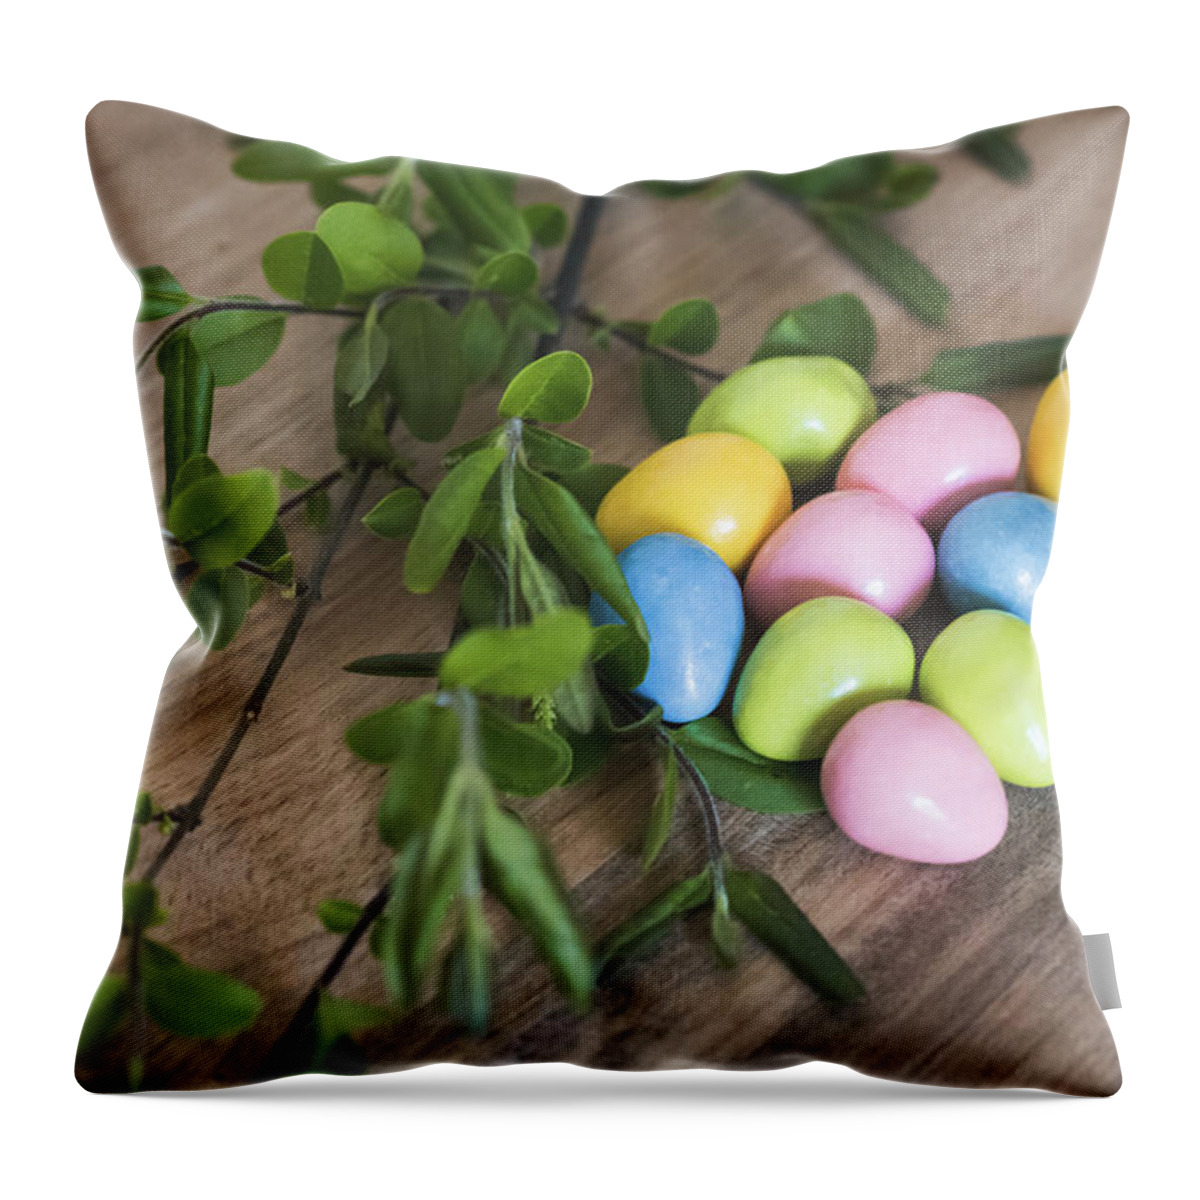 Candies Throw Pillow featuring the photograph Easter Eggs 20 by Andrea Anderegg